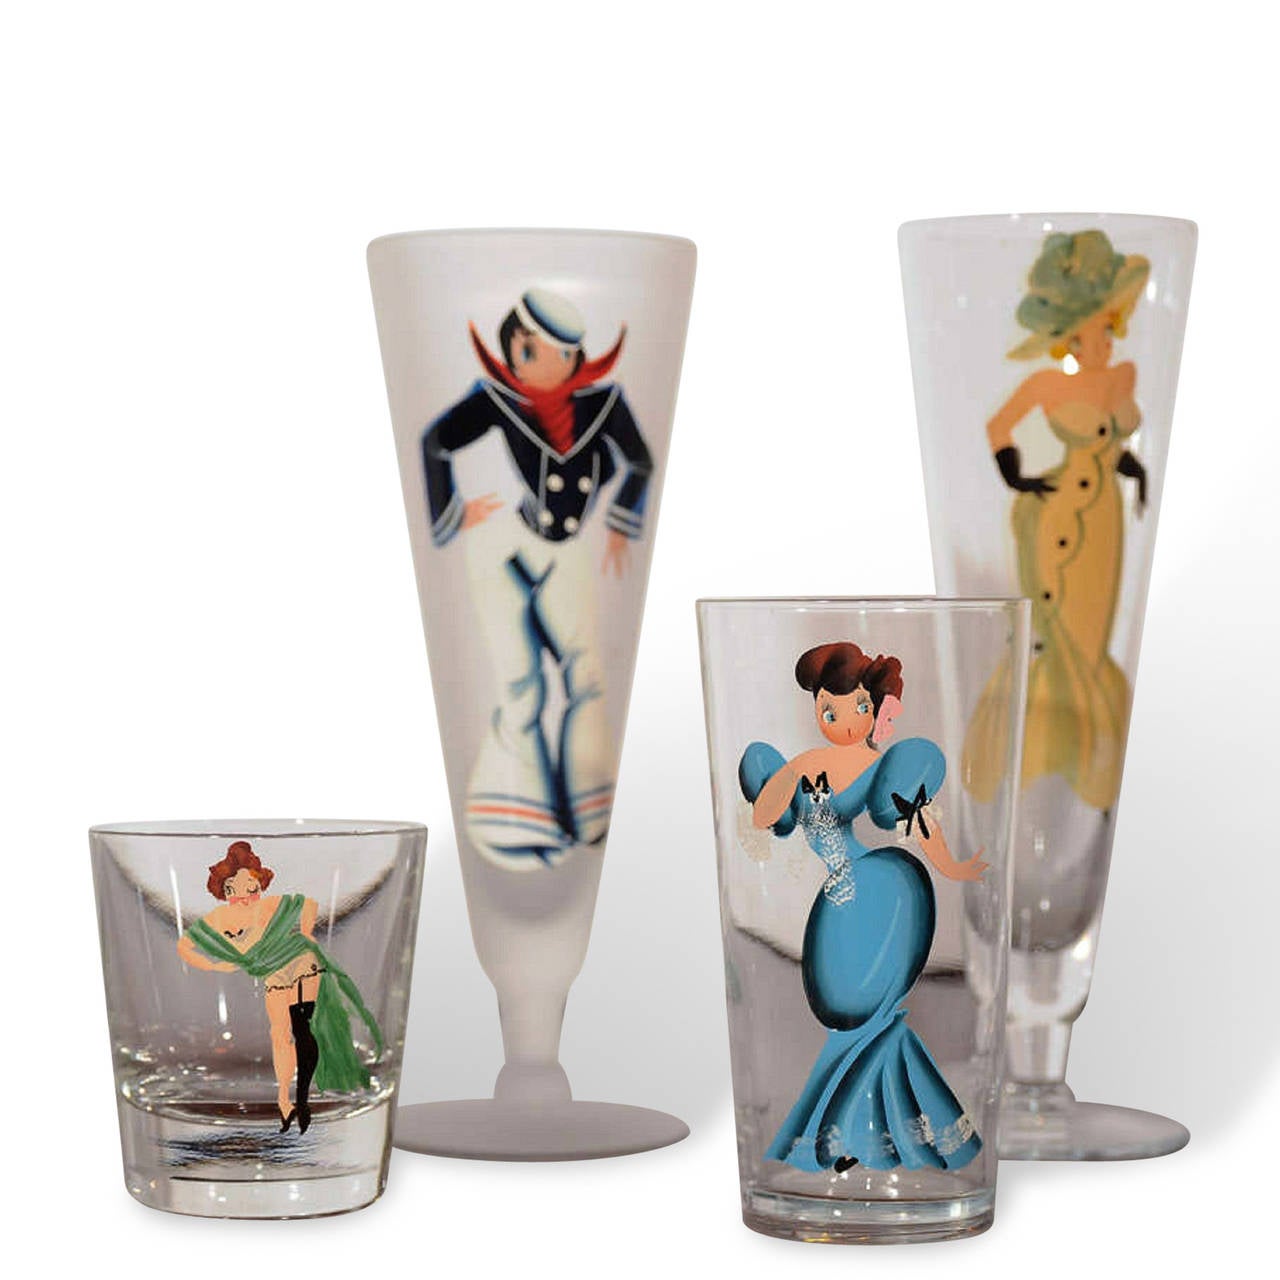 French Set of Hand-Painted Pin Up Girl Drinking Glasses from the Estate of Doris Duke